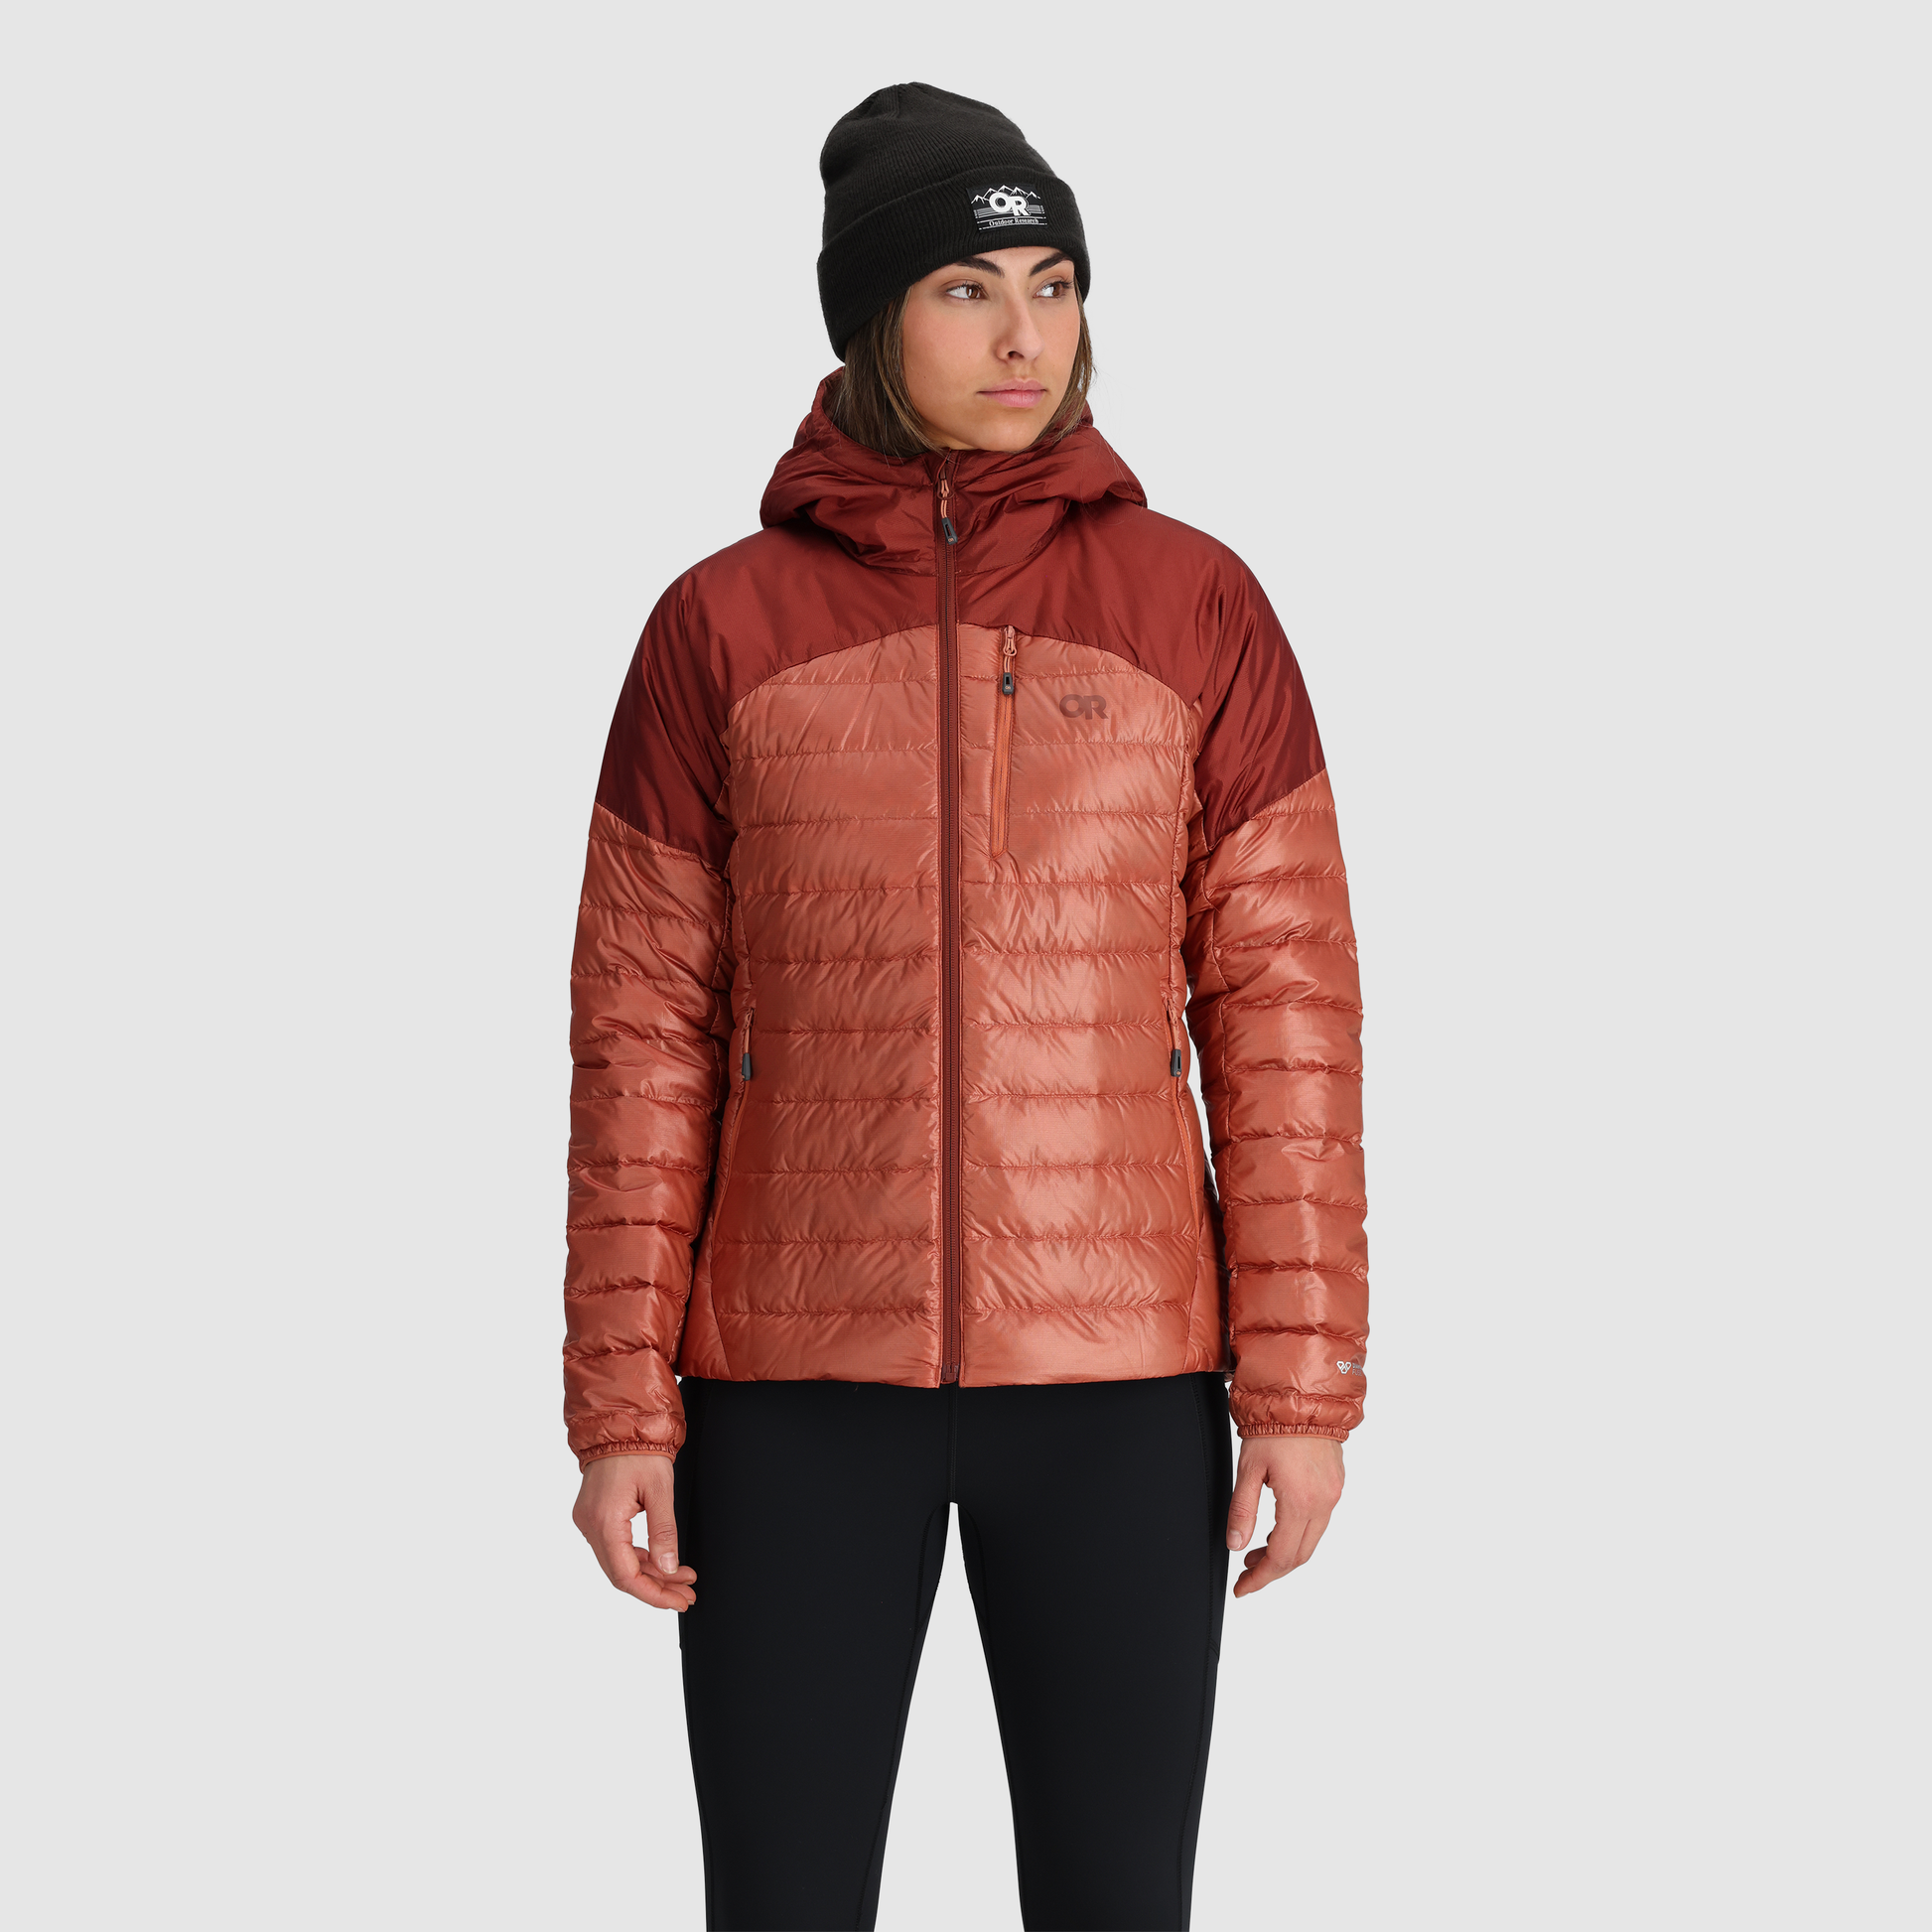 New Down Canada Jacket Outdoor Thickening Wind-resistant Cold